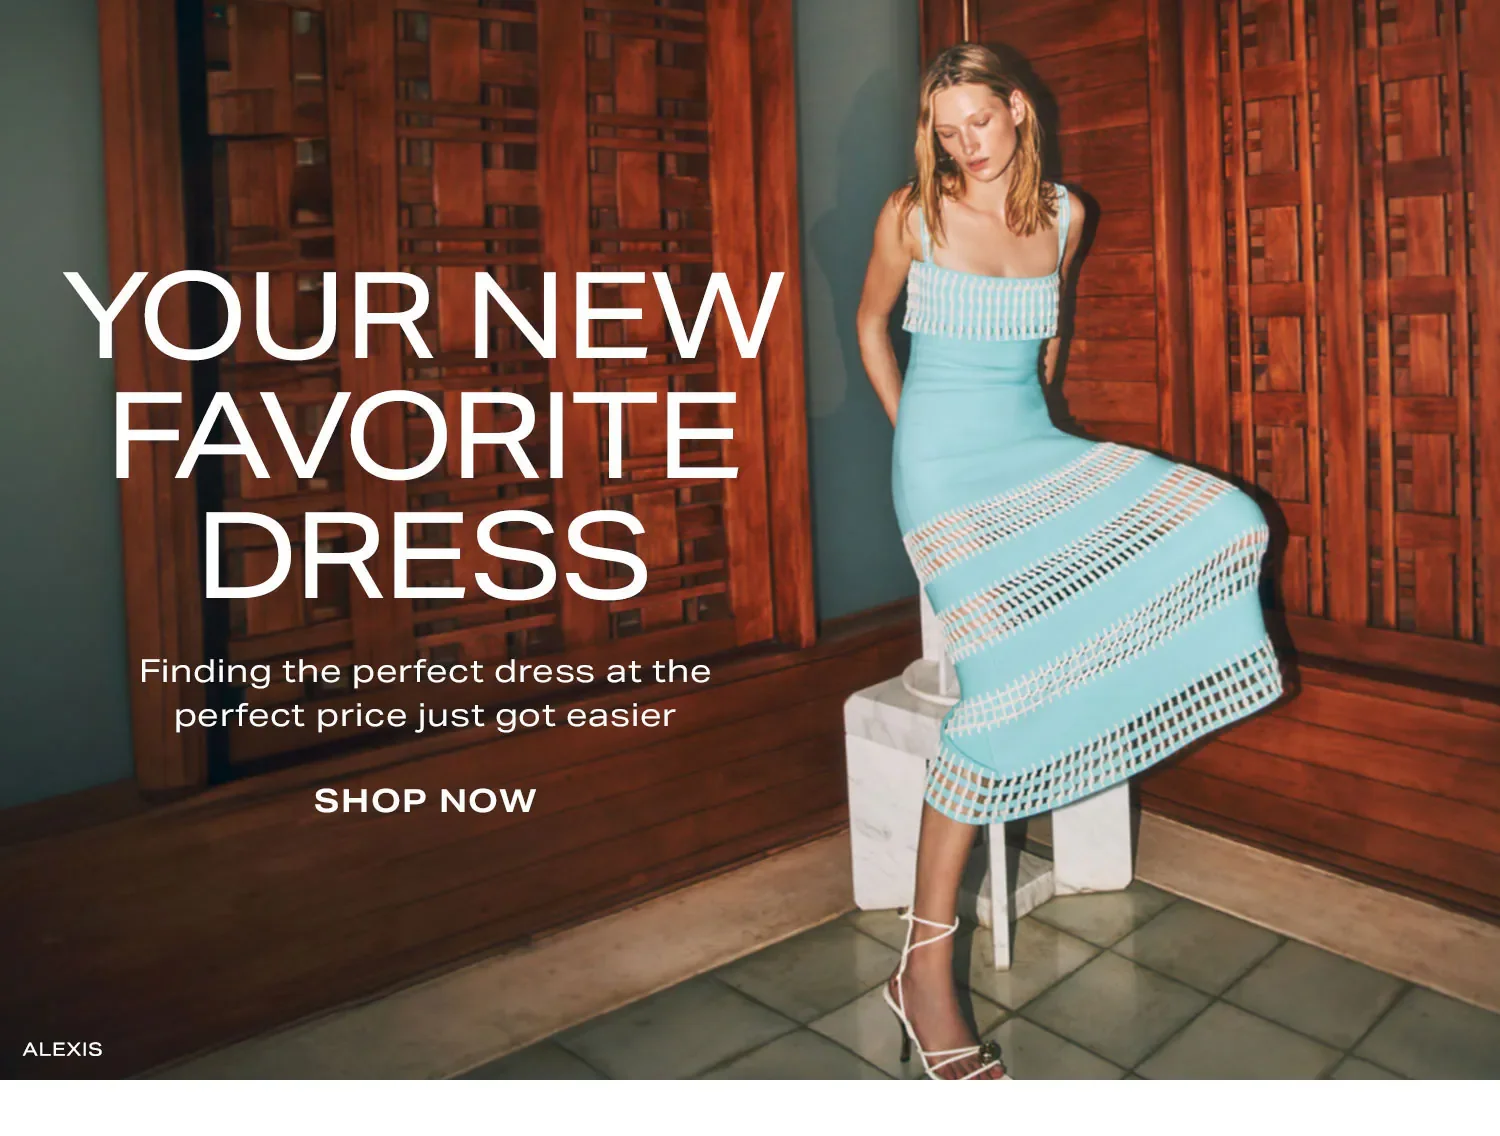 Your New Favorite Dress. Finding the perfect dress at the perfect price just got easier. Shop Now.